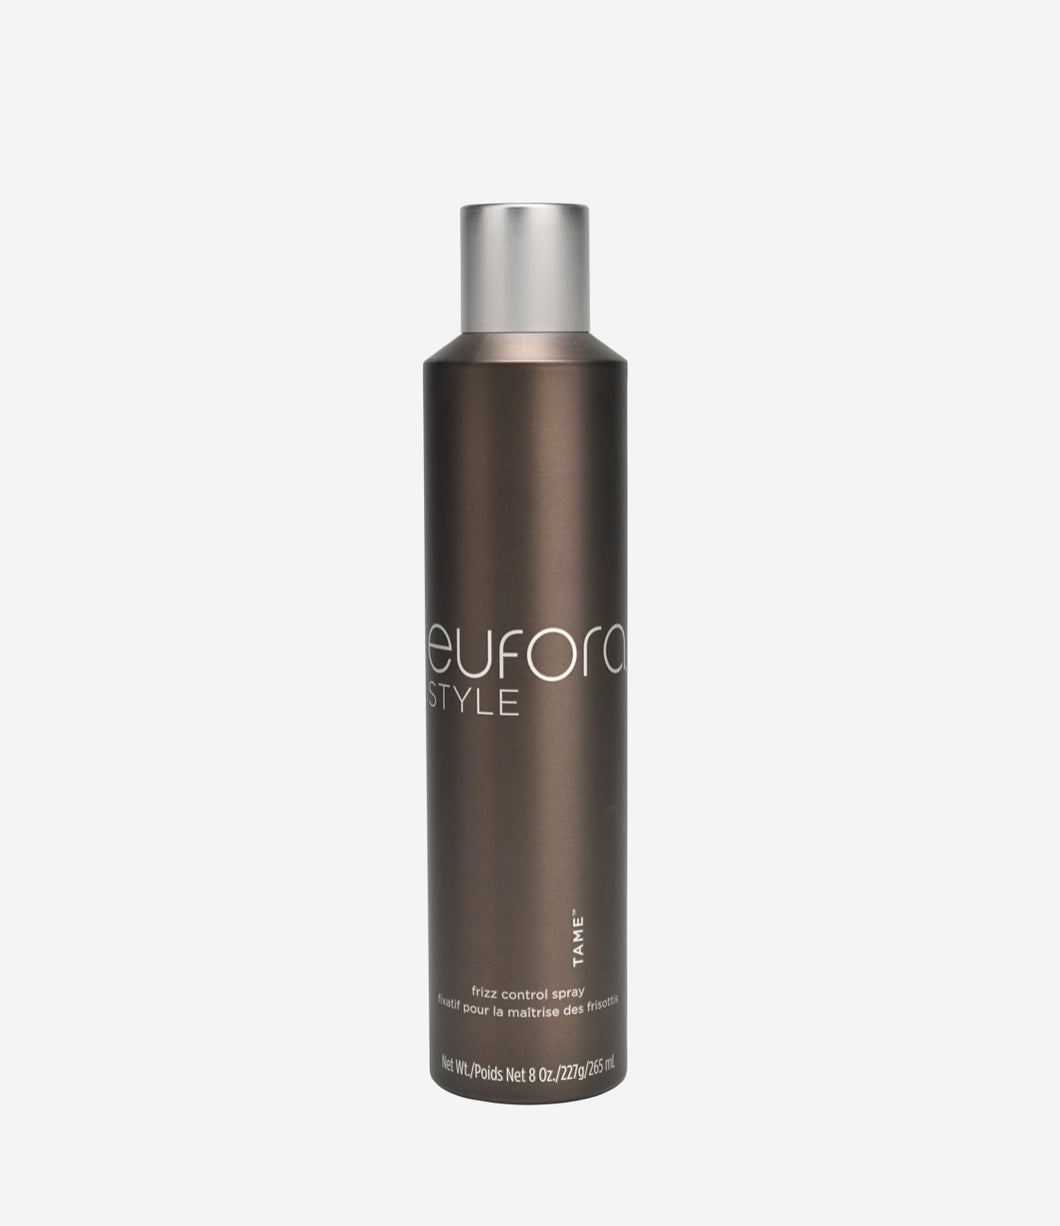 Eufora frizz control spray is a Frizz Control Finishing Spray provides a flexible, brushable, light hold. Adds just a hint of shine while leaving hair touchably soft. Great Anti-humectant properties.